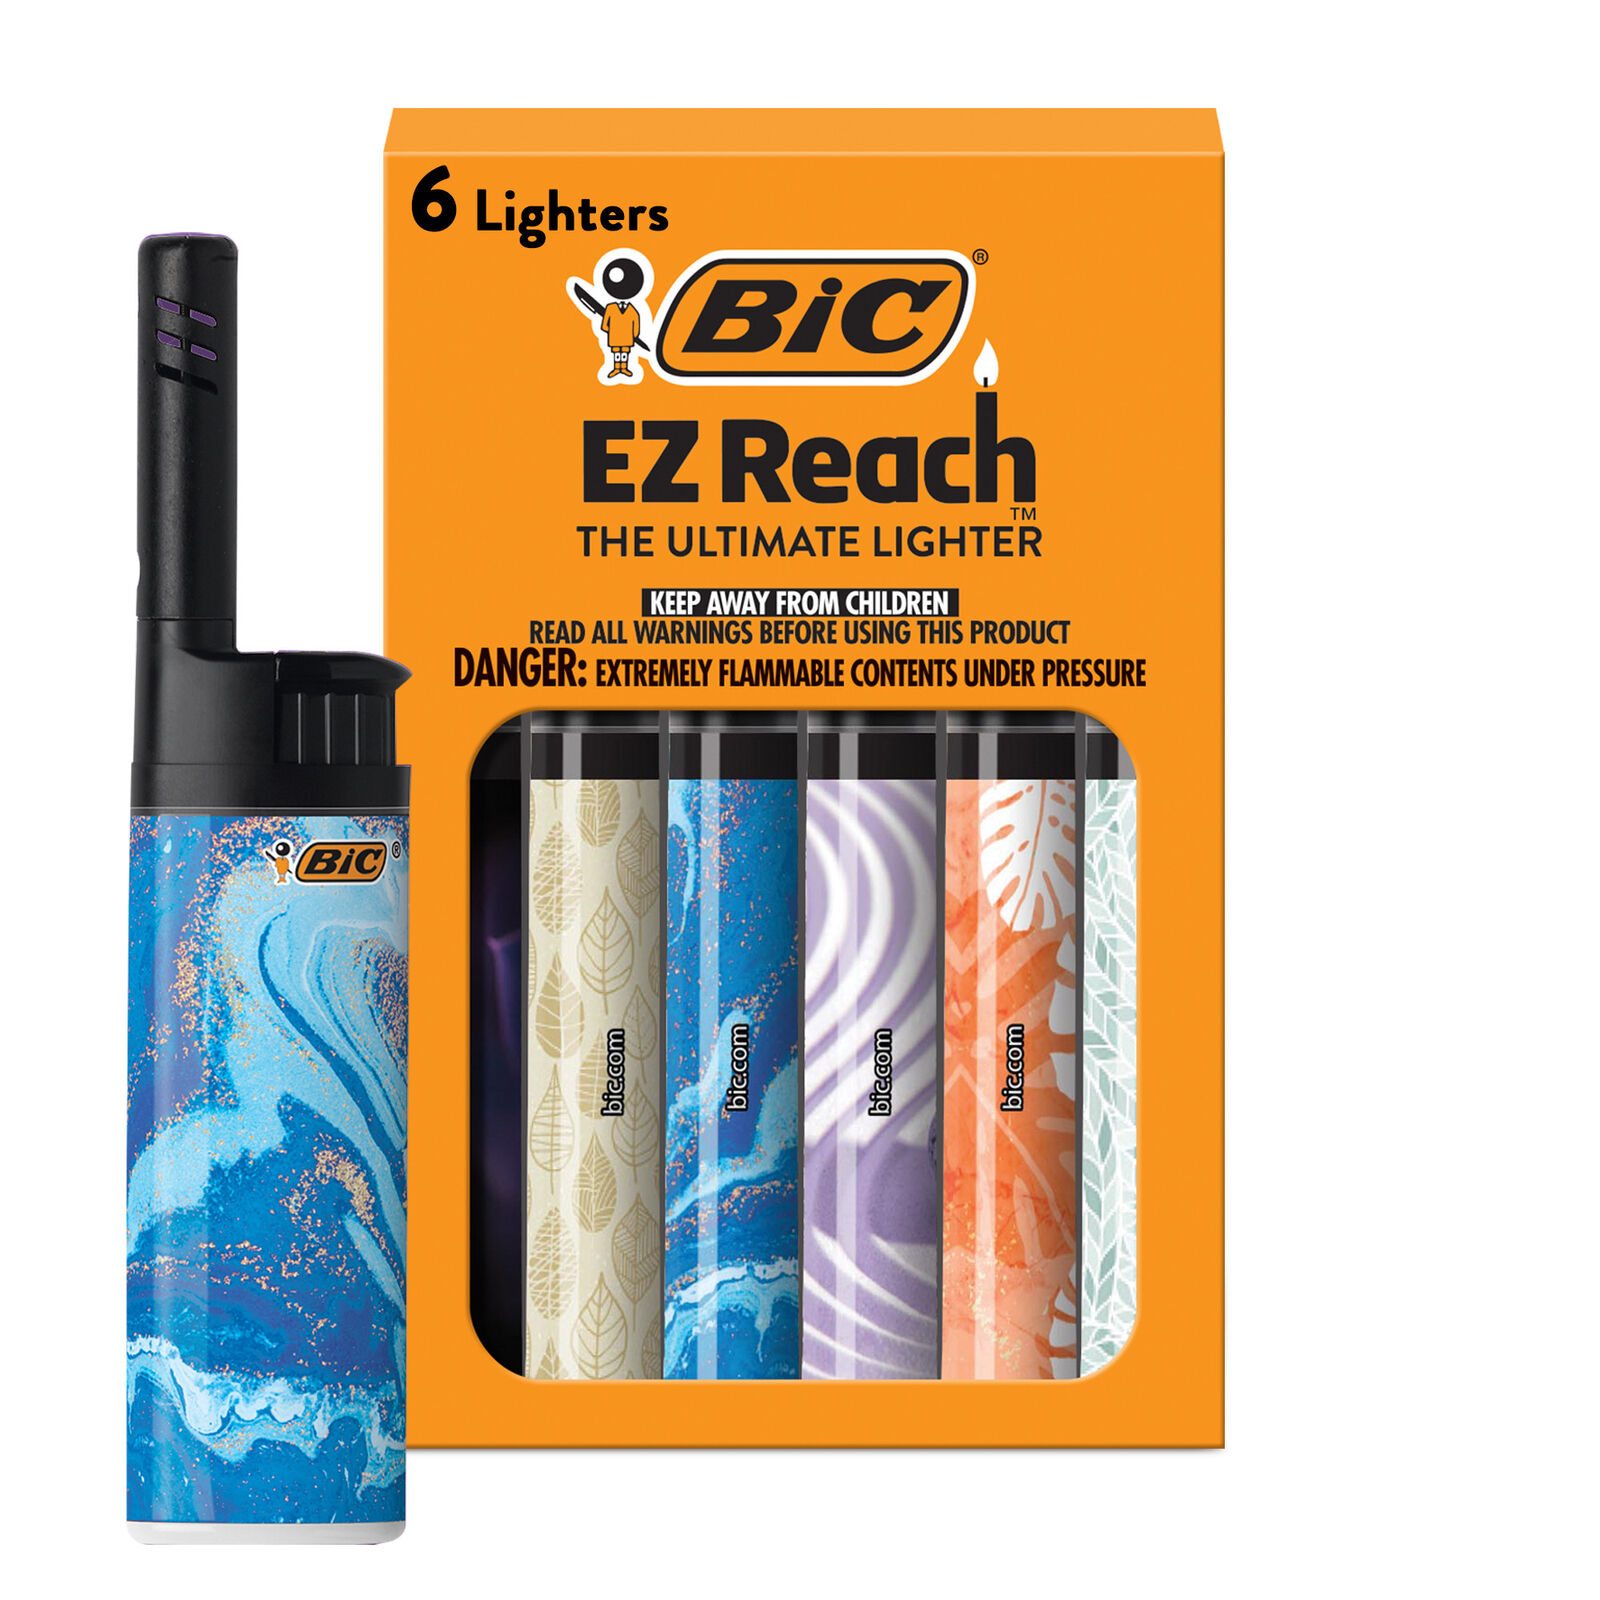 BIC EZ Reach Lighter, Home Décor Design, 6 Pack (Assortment of Designs May Vary)